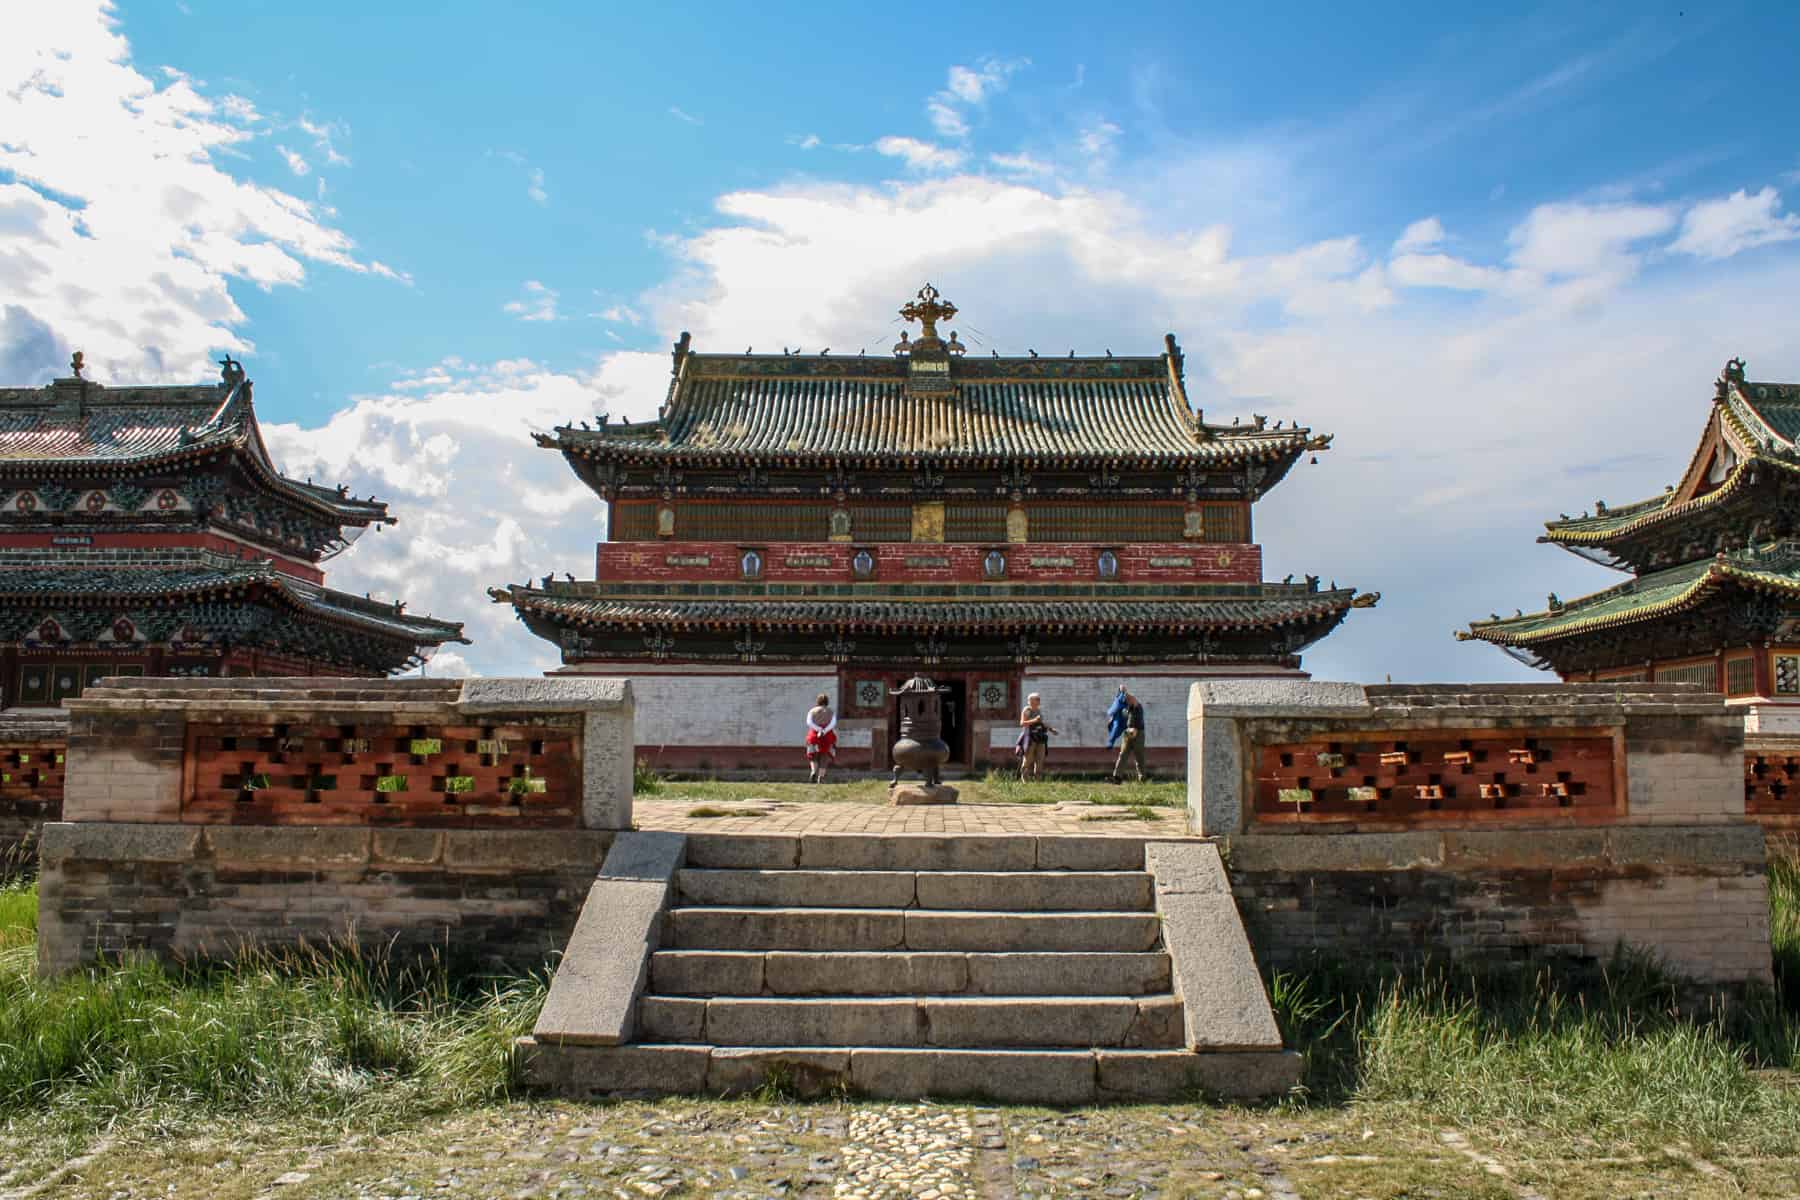 The red and gold temple structures with green roofs at Erdene Zuu Monastery Mongolia